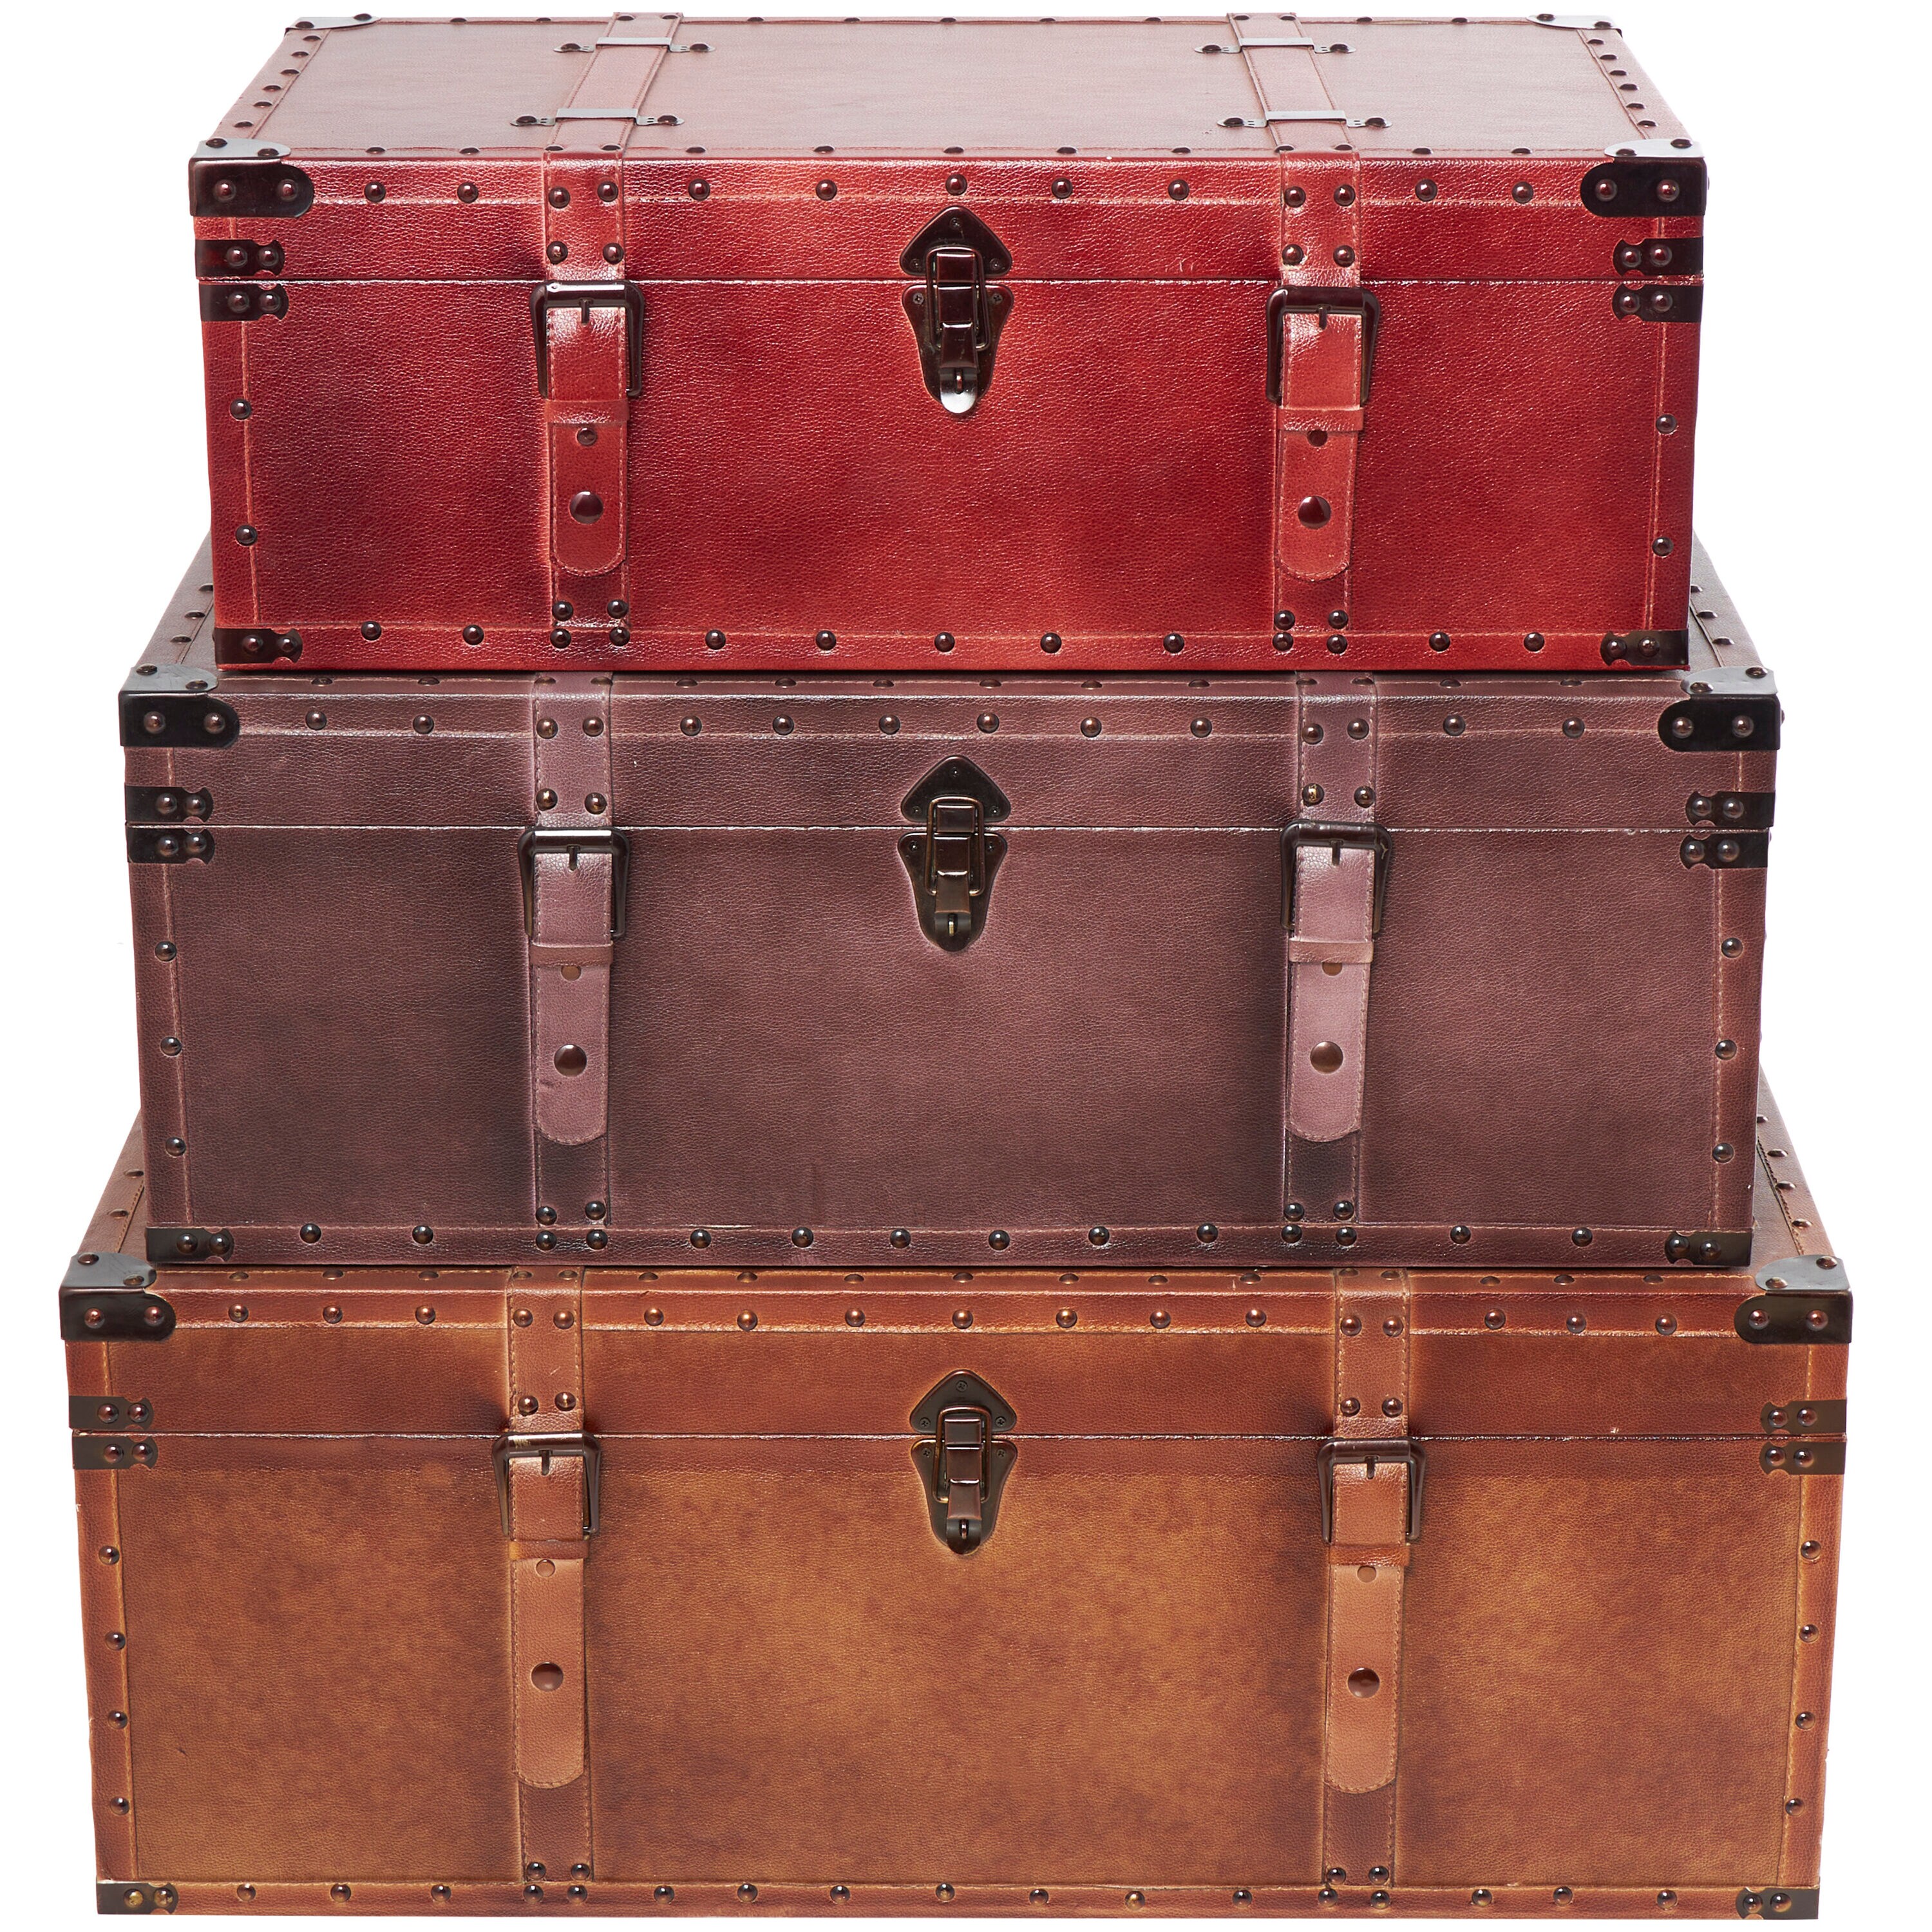 Vintiquewise 2-colored Vintage Style Luggage Suitcase/Trunk Set of 2